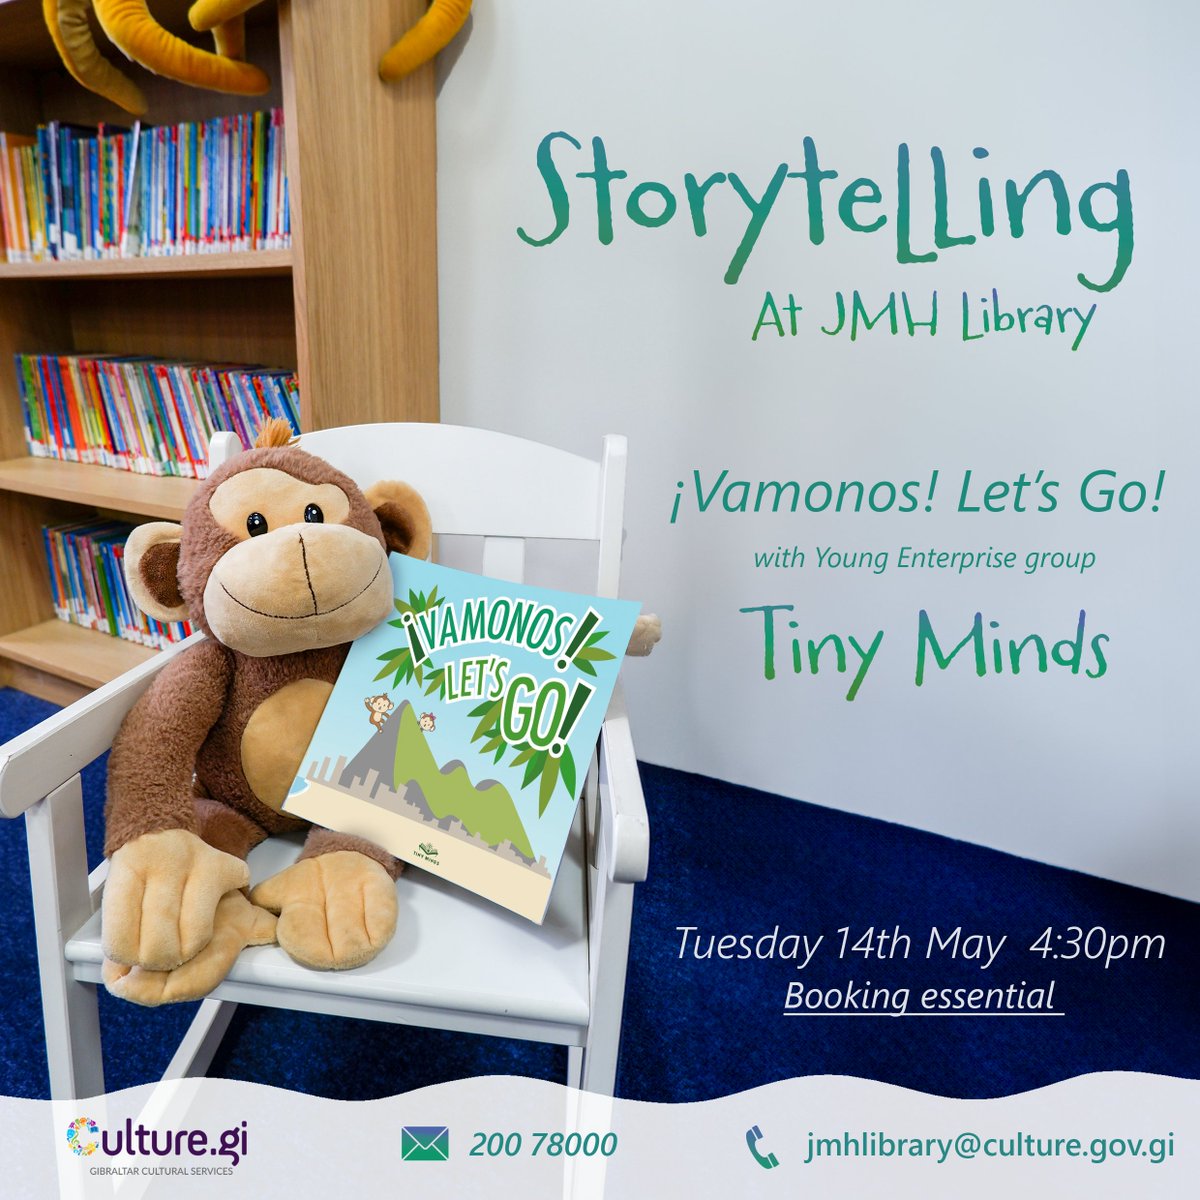 📷 Swing into Storytelling with 'Vamonos, Lets Go!' 📷 Join us next week, Tuesday 14th May, at 4:30pm at the John Mackintosh Hall Library for a bilingual storytelling session by the Young Enterprise group, Tiny Minds. Booking is essential, so secure your spot now!#GCSStorytelling